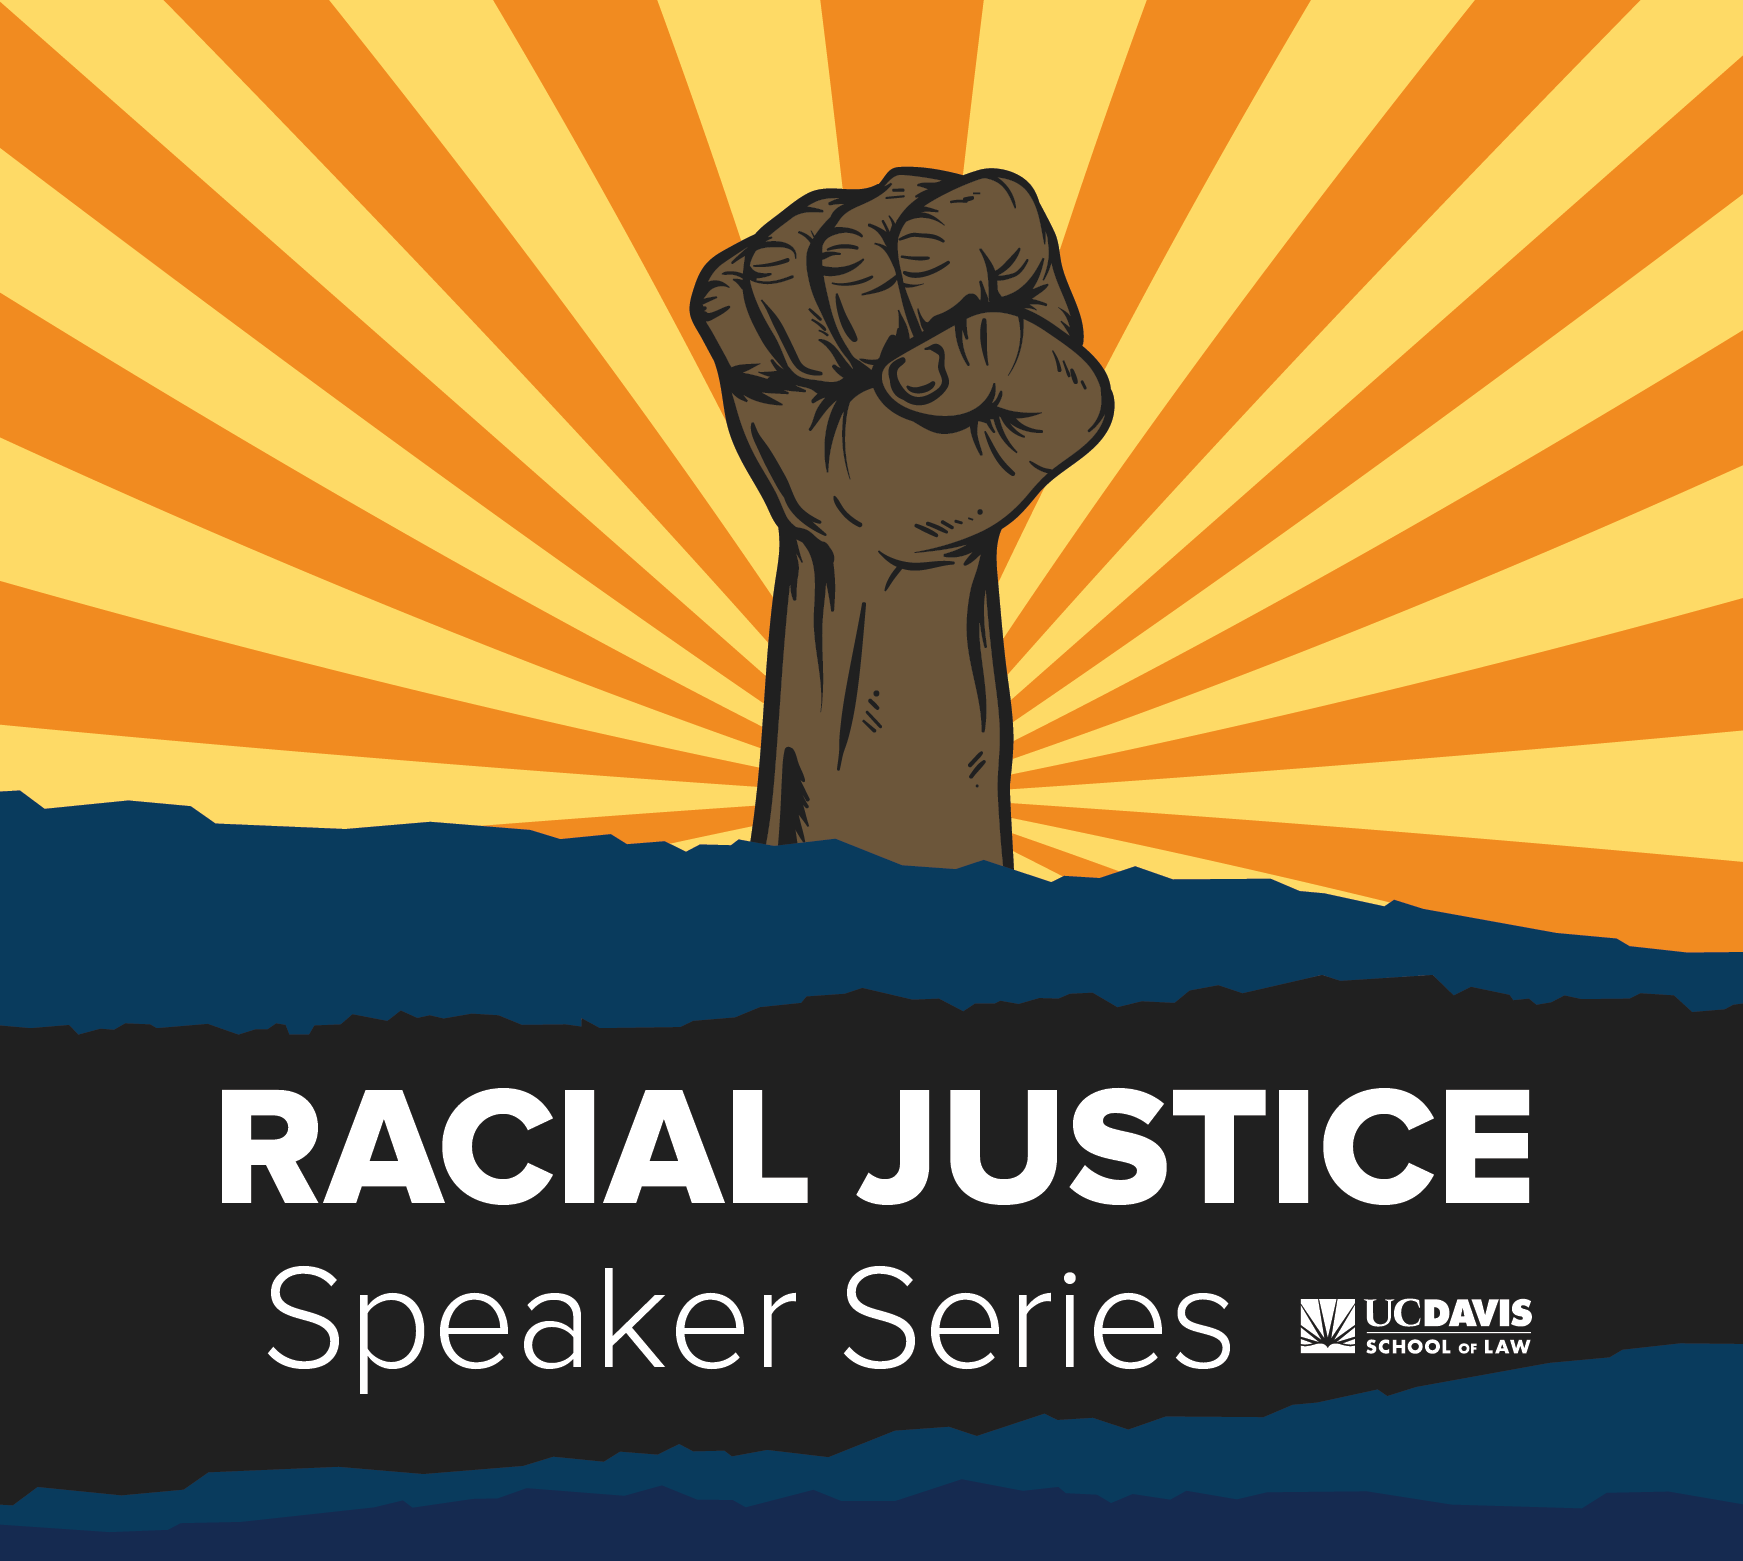 Black fist surrounded by sunlight bursting with text below: "Racial Justice Speaker Series"